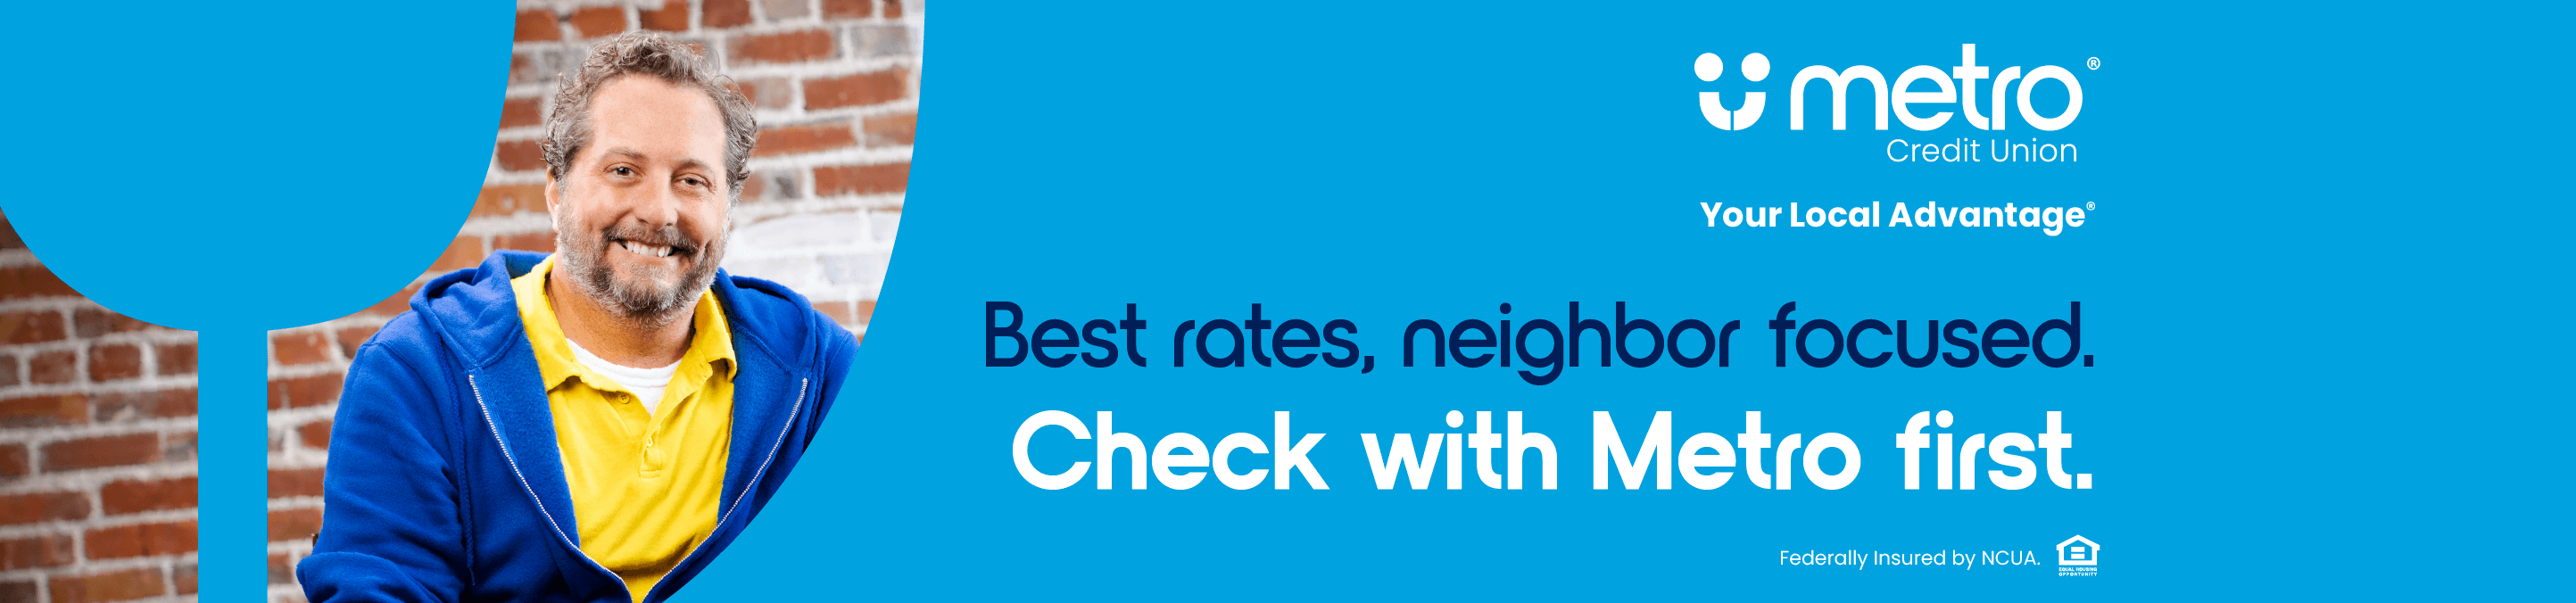 Best rates. Neighbor focused. Check with Metro first.